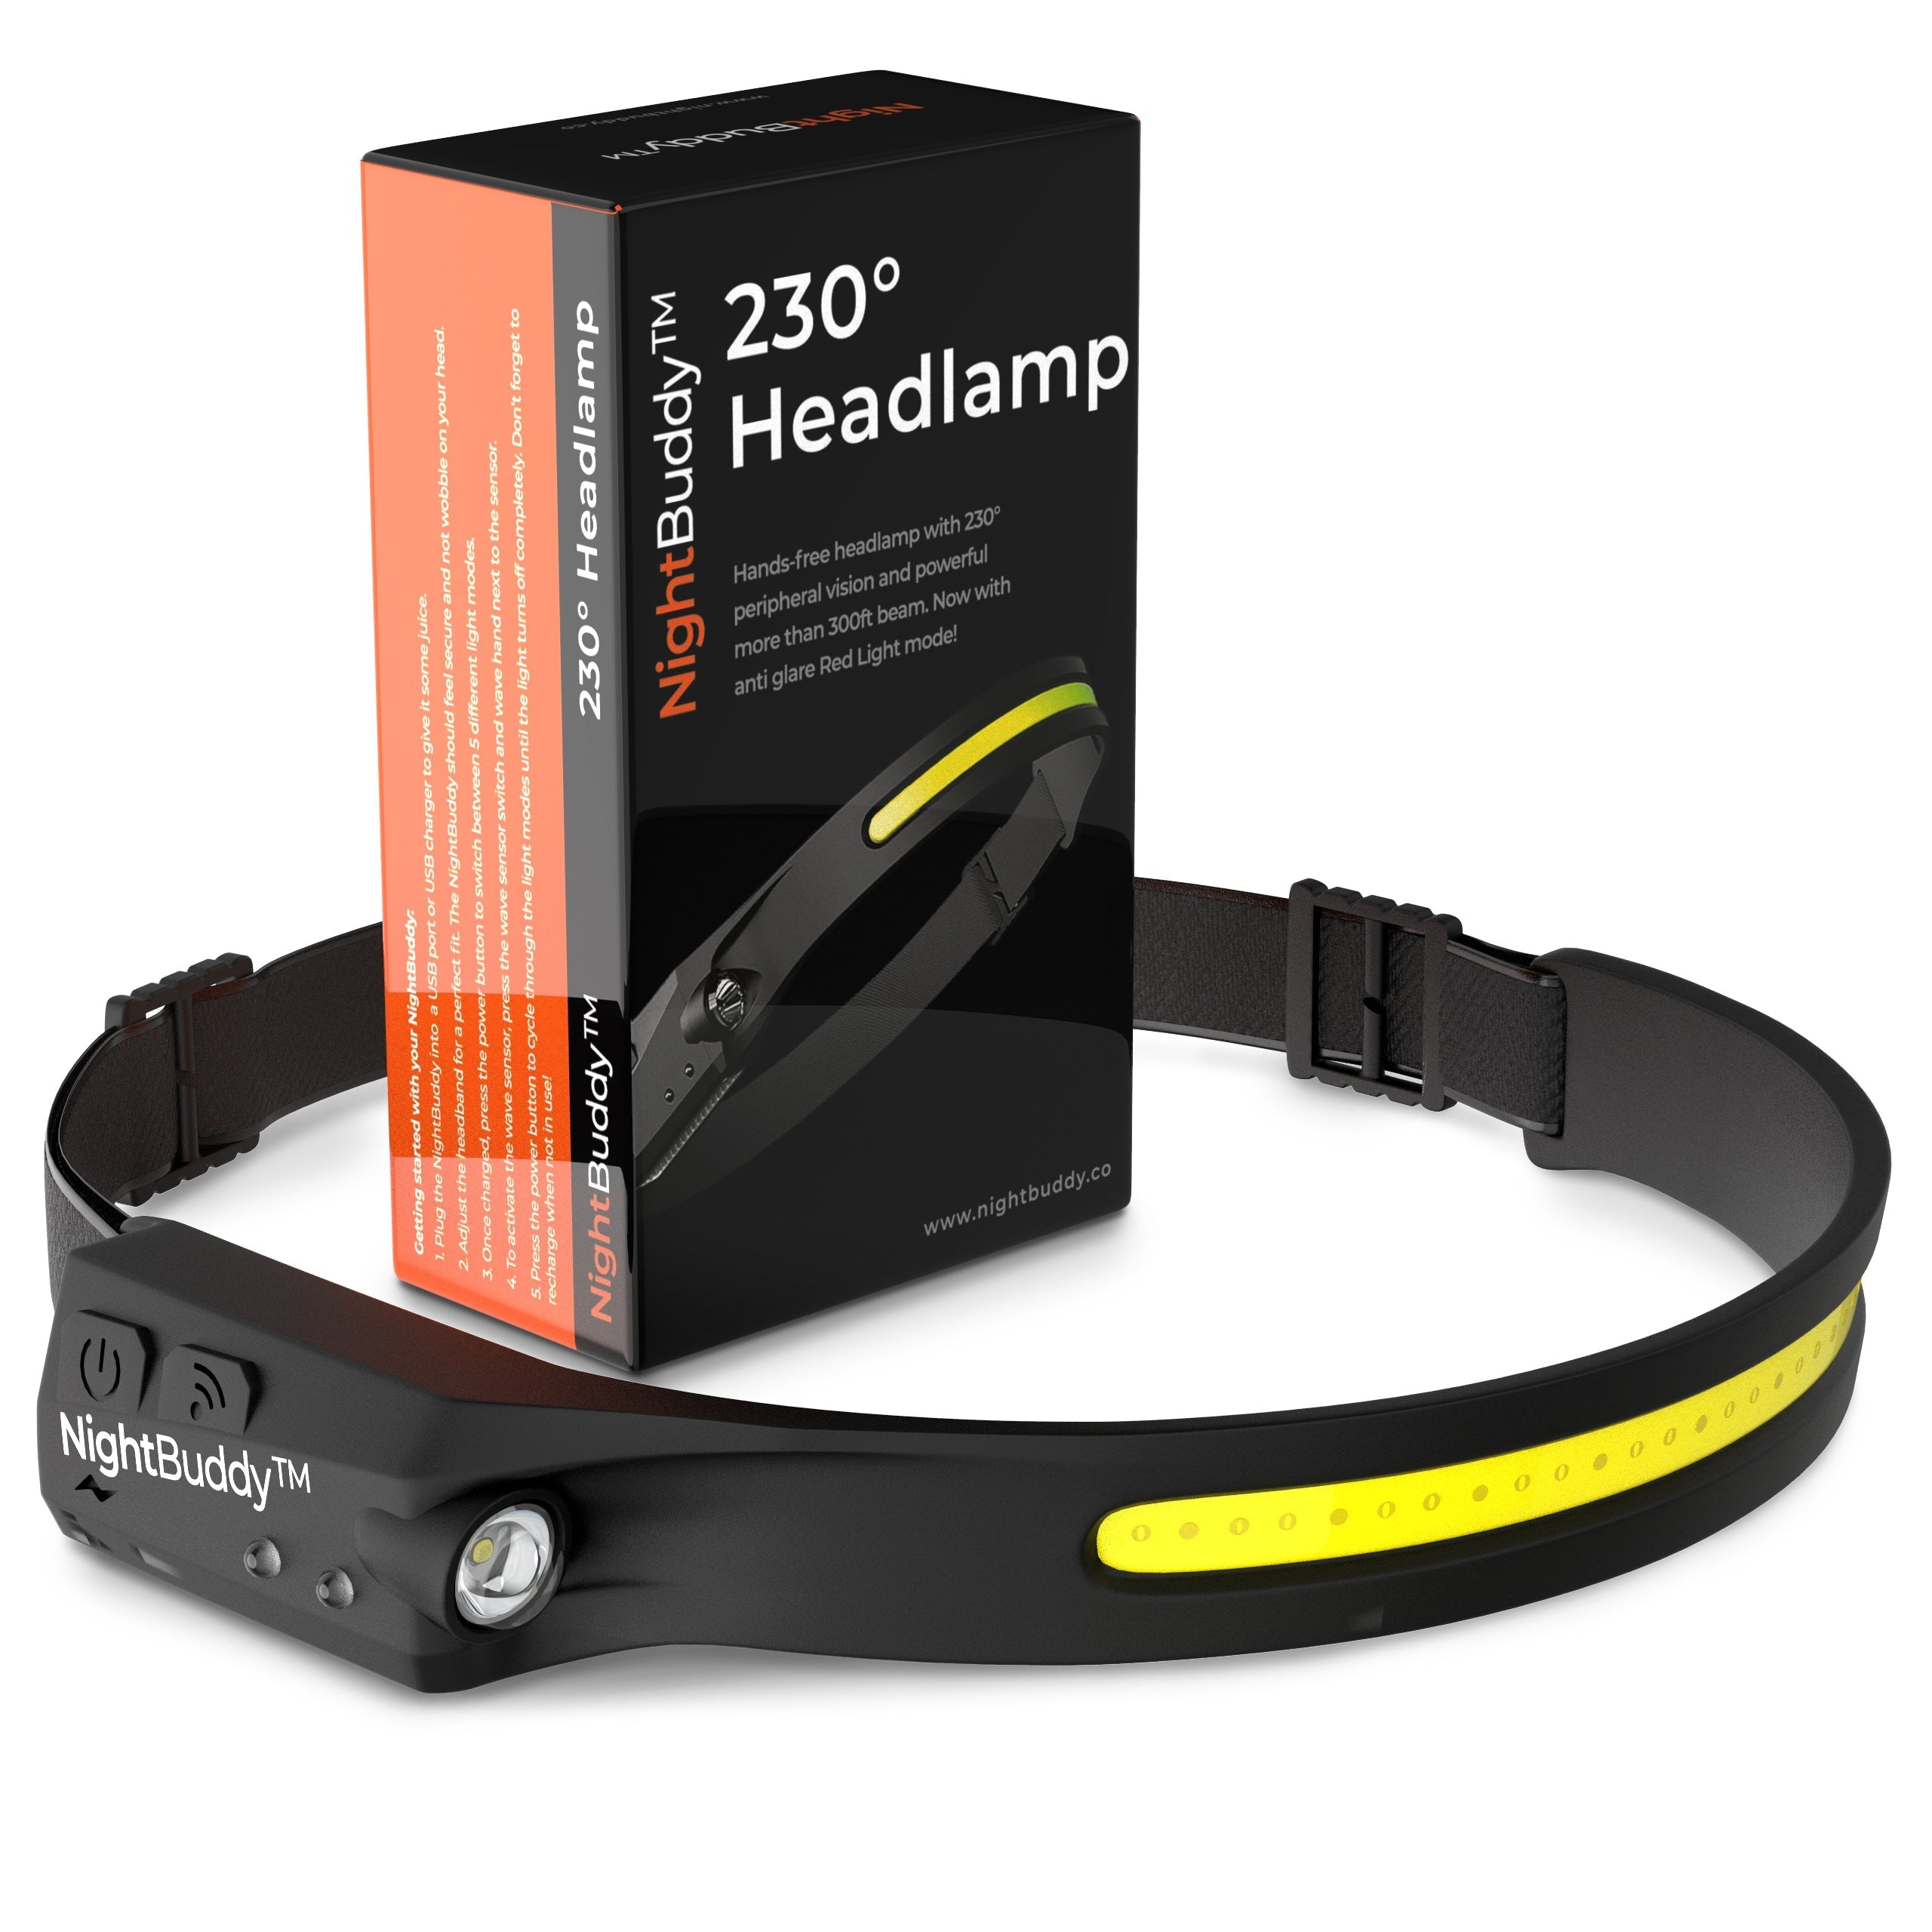 NightBuddy The Original 230° LED Rechargeable Headlamp - #1 Choice For Mechanics, Outdoor Enthusiasts, Dog Walking, Tow Truck Drivers, & Survival Kit